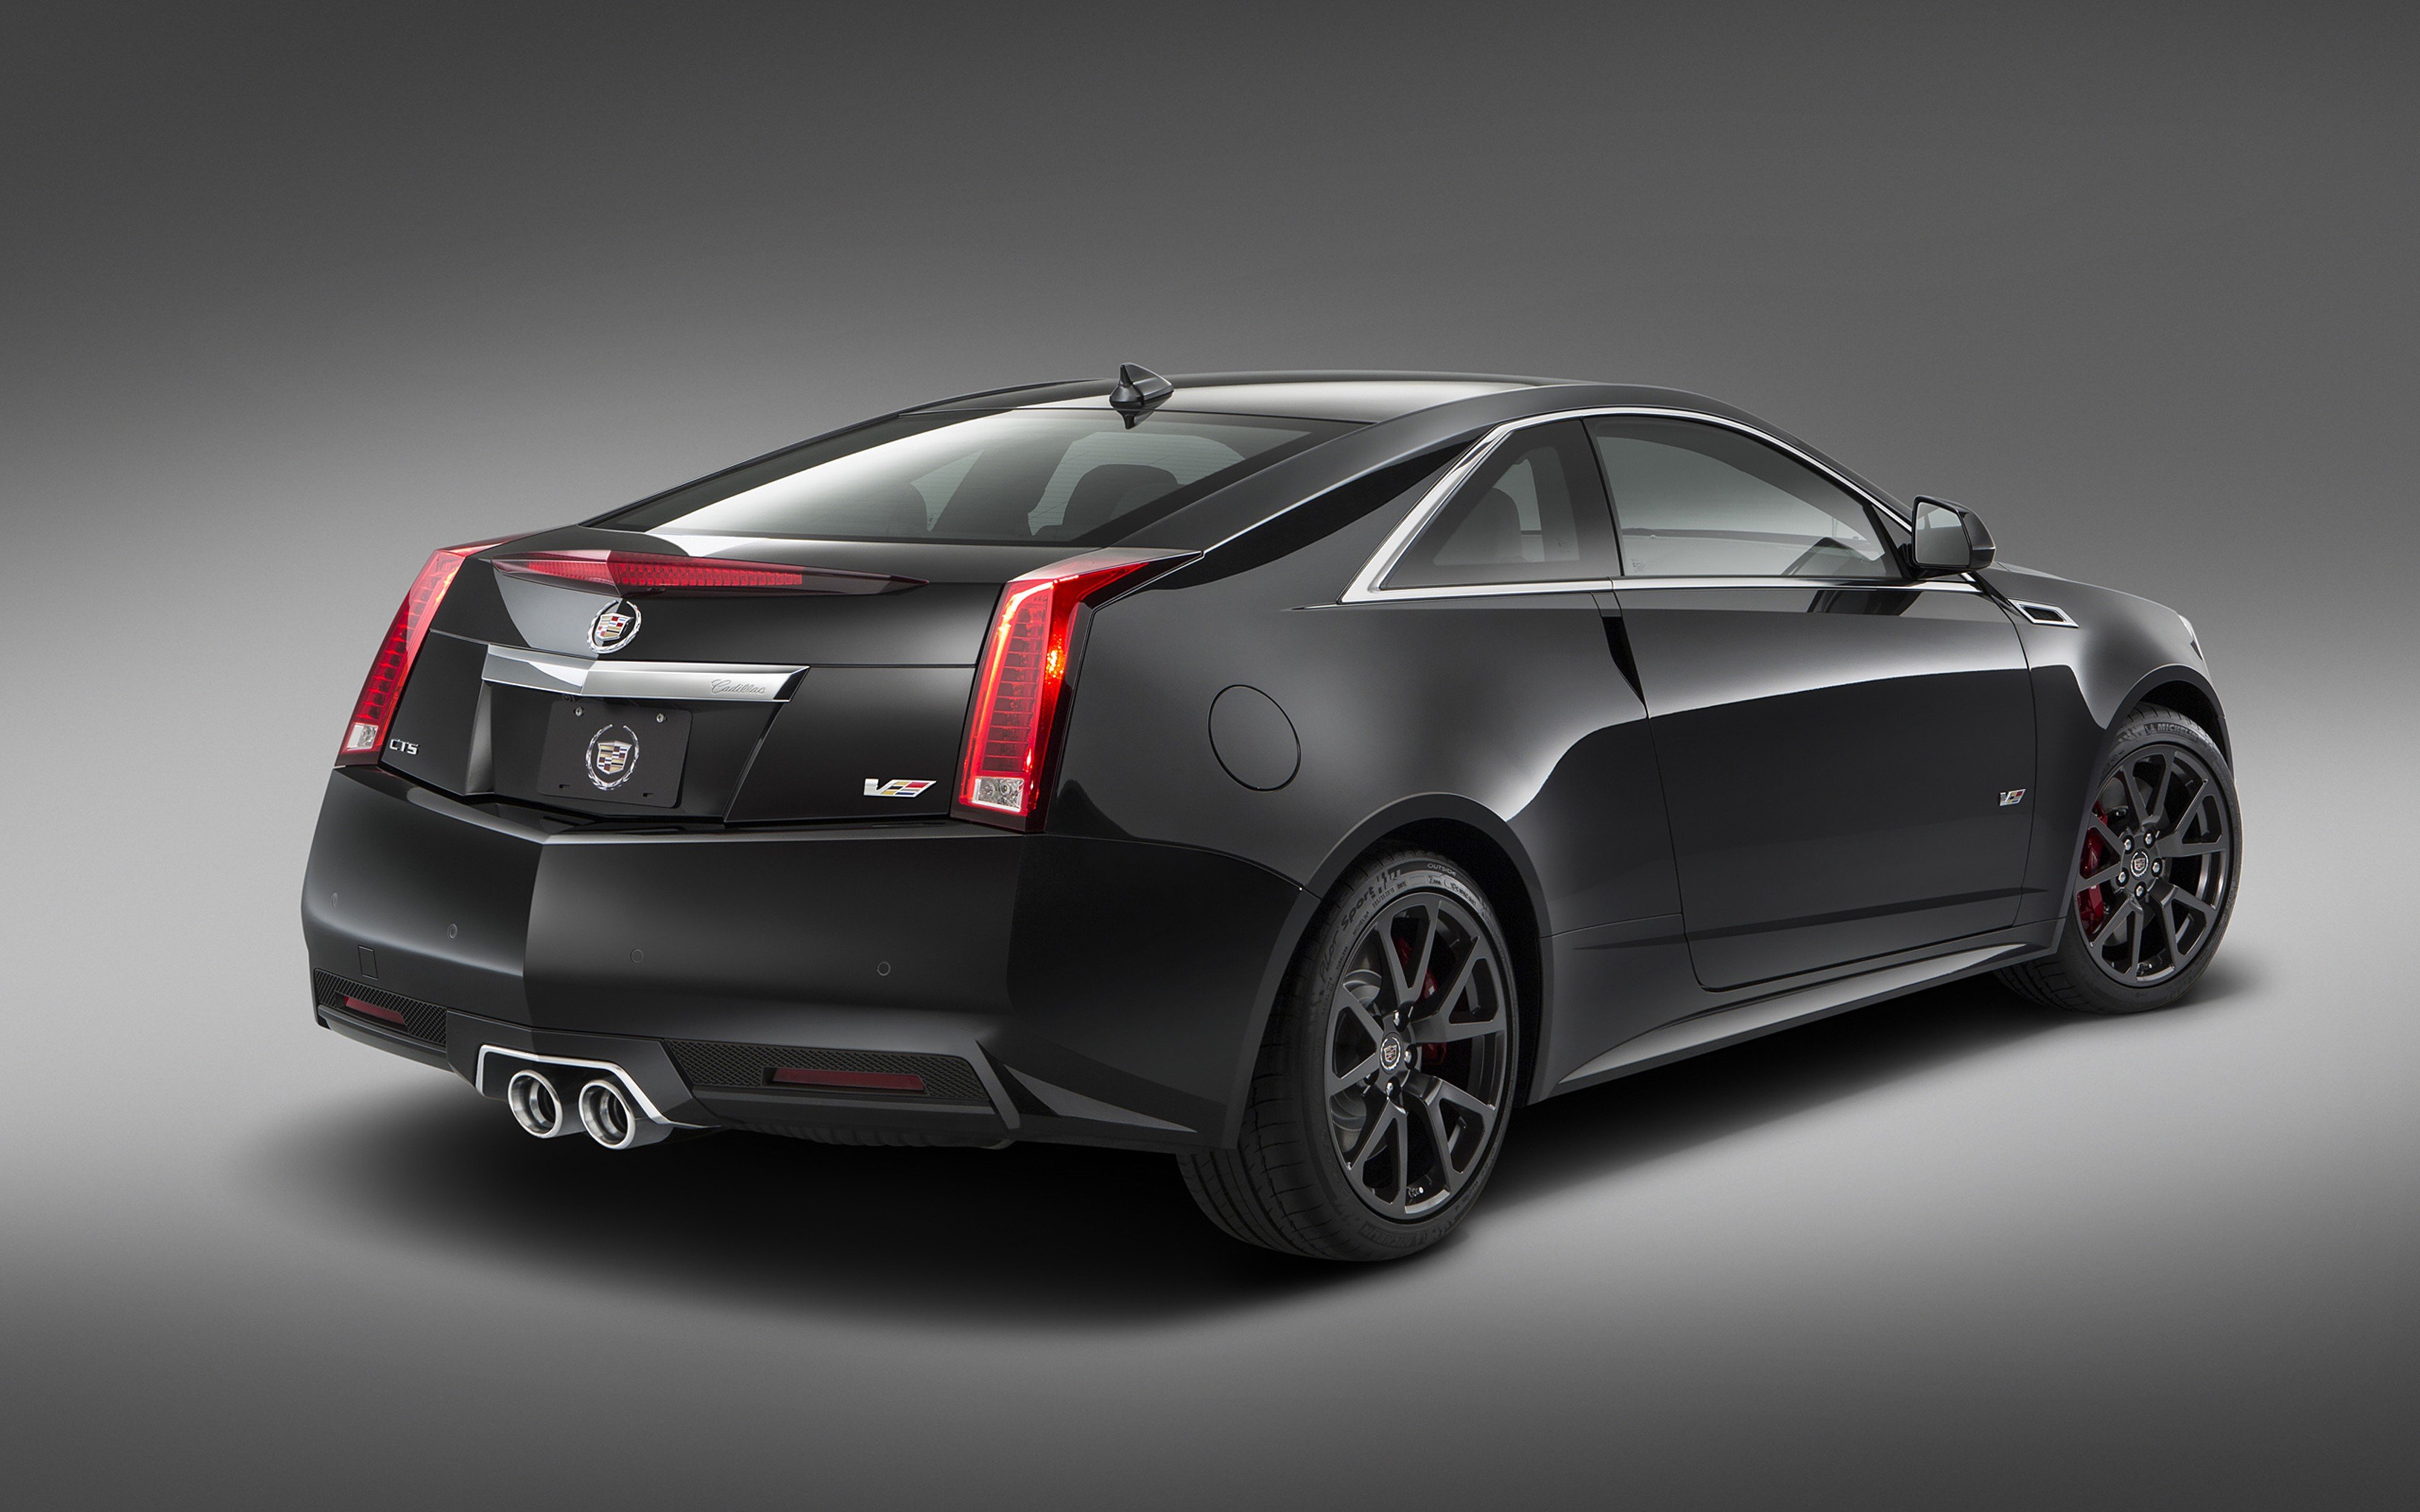 2015, Cadillac, Cts v, Coupe, Special, Edition, Car, 4000x2500 Wallpaper